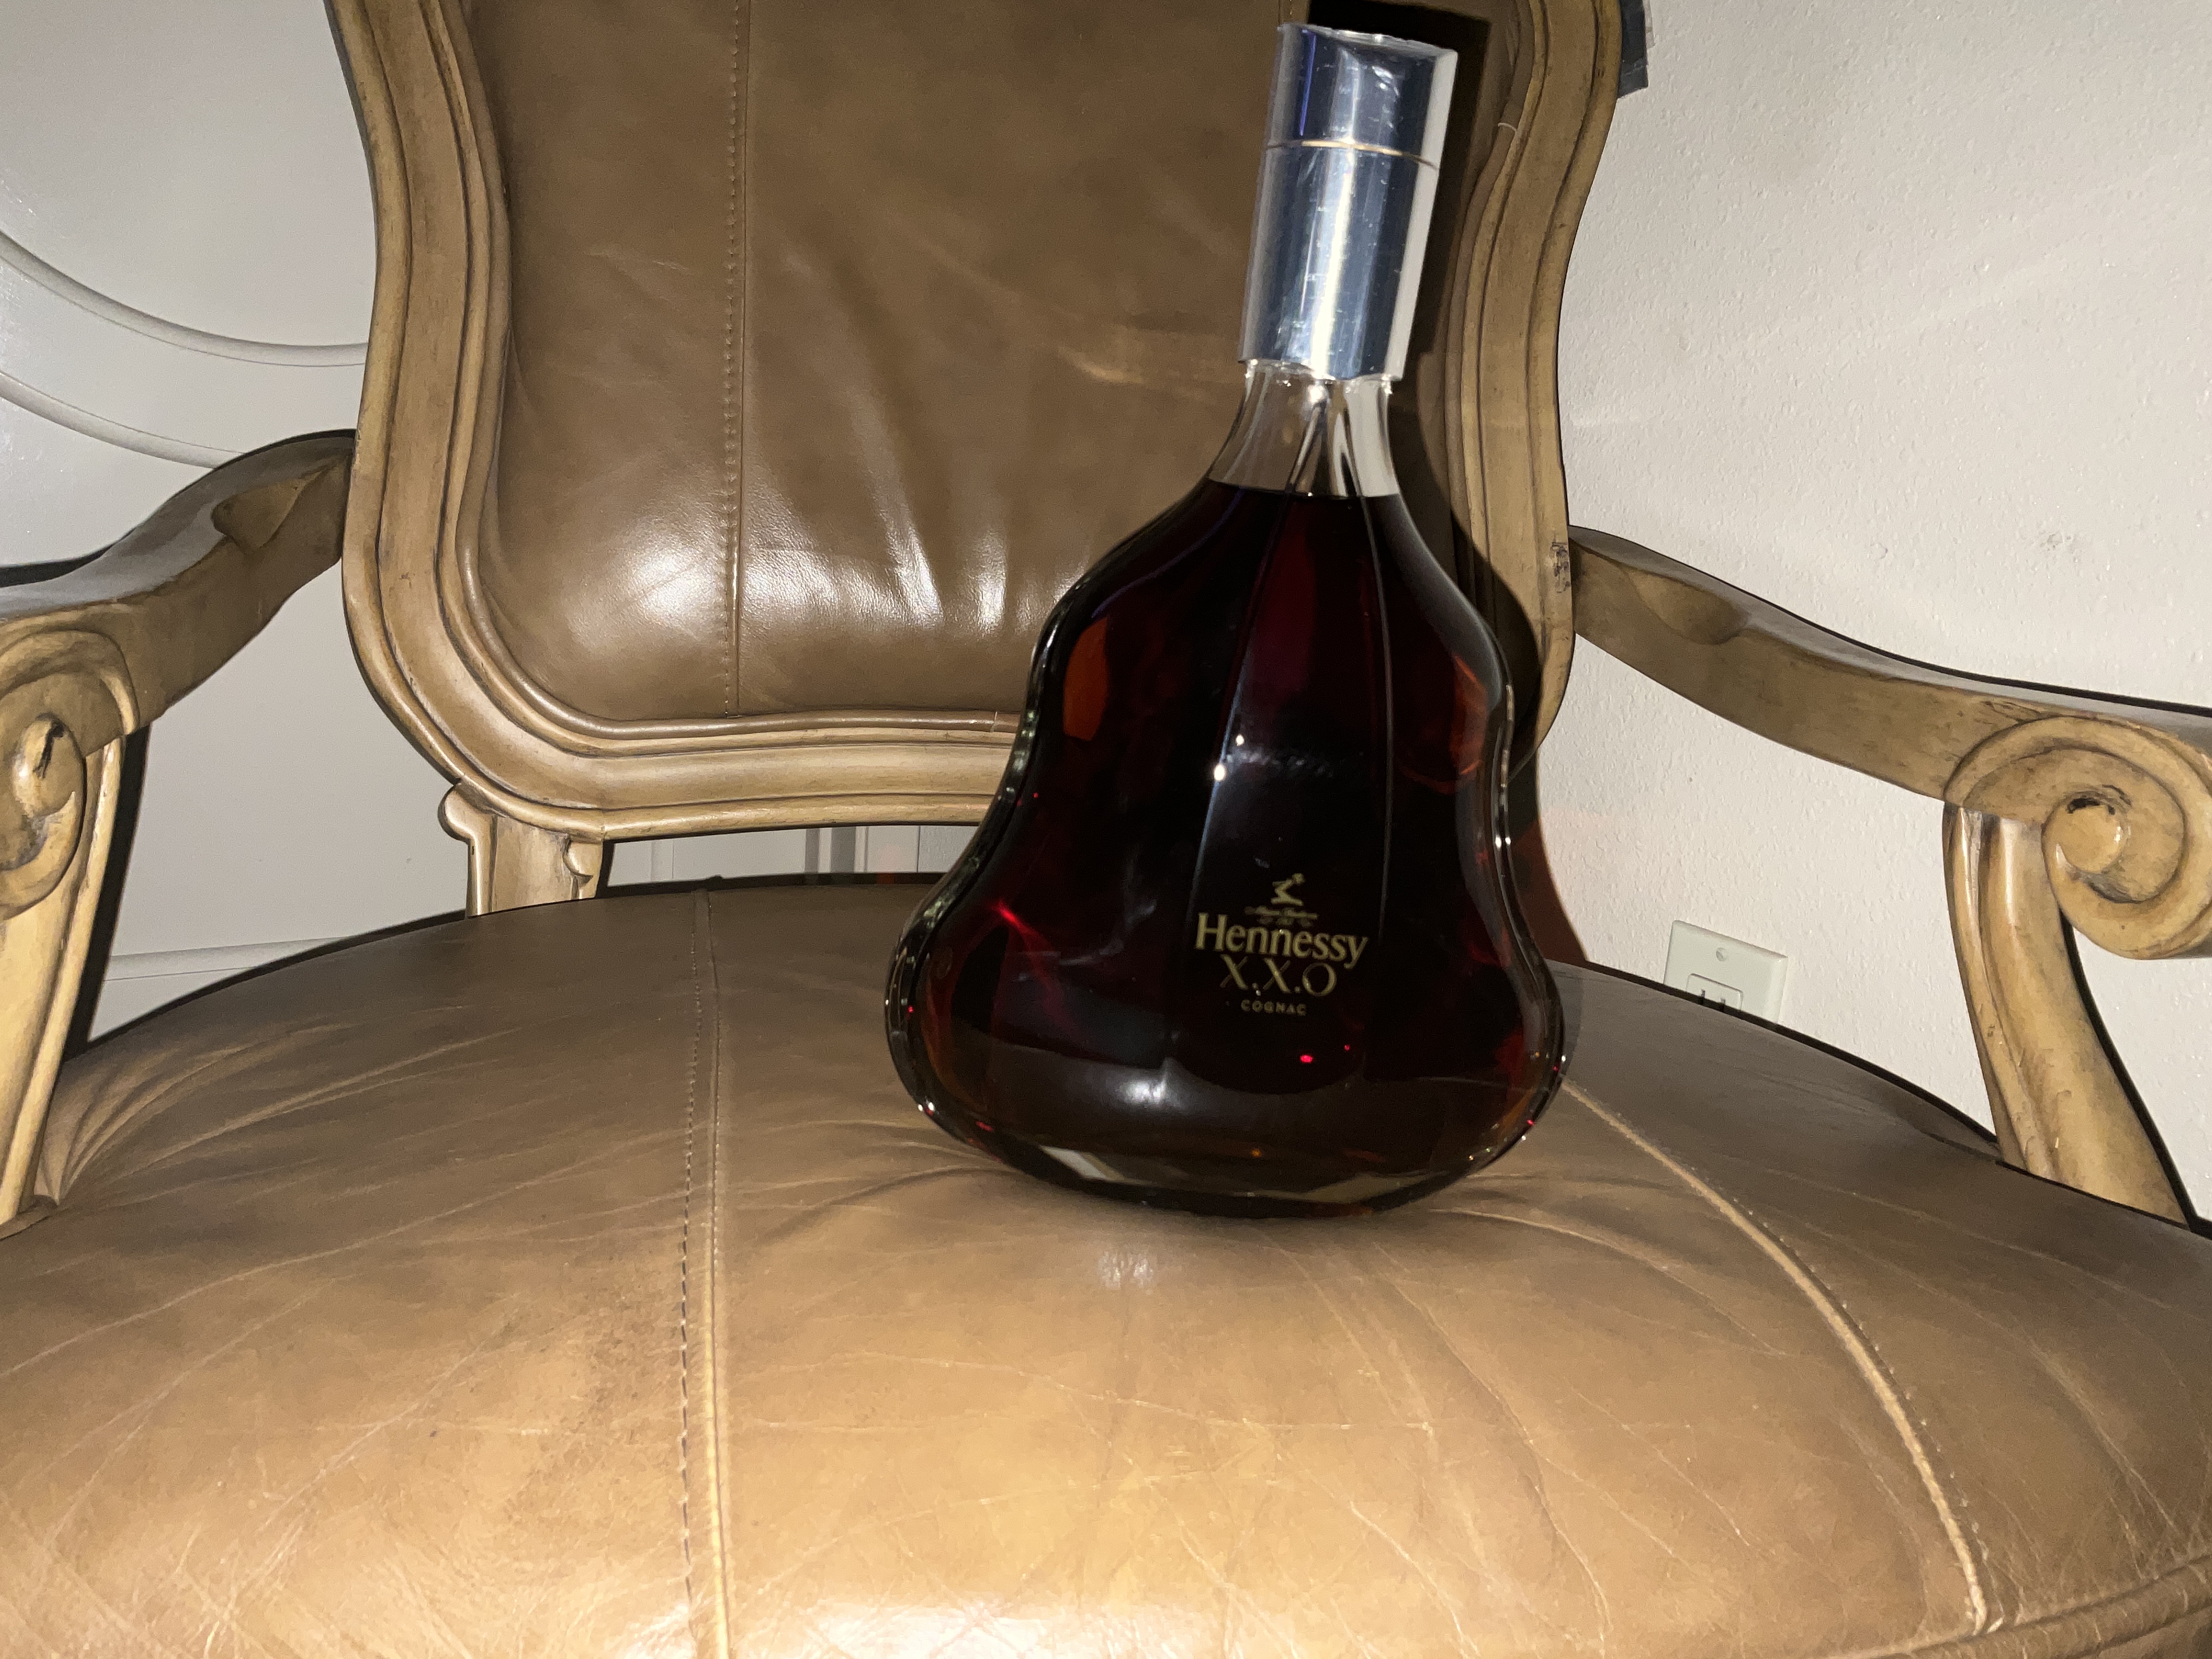 97/100 pts  Craton M. review of Hennessy XXO Hors d'Age Cognac